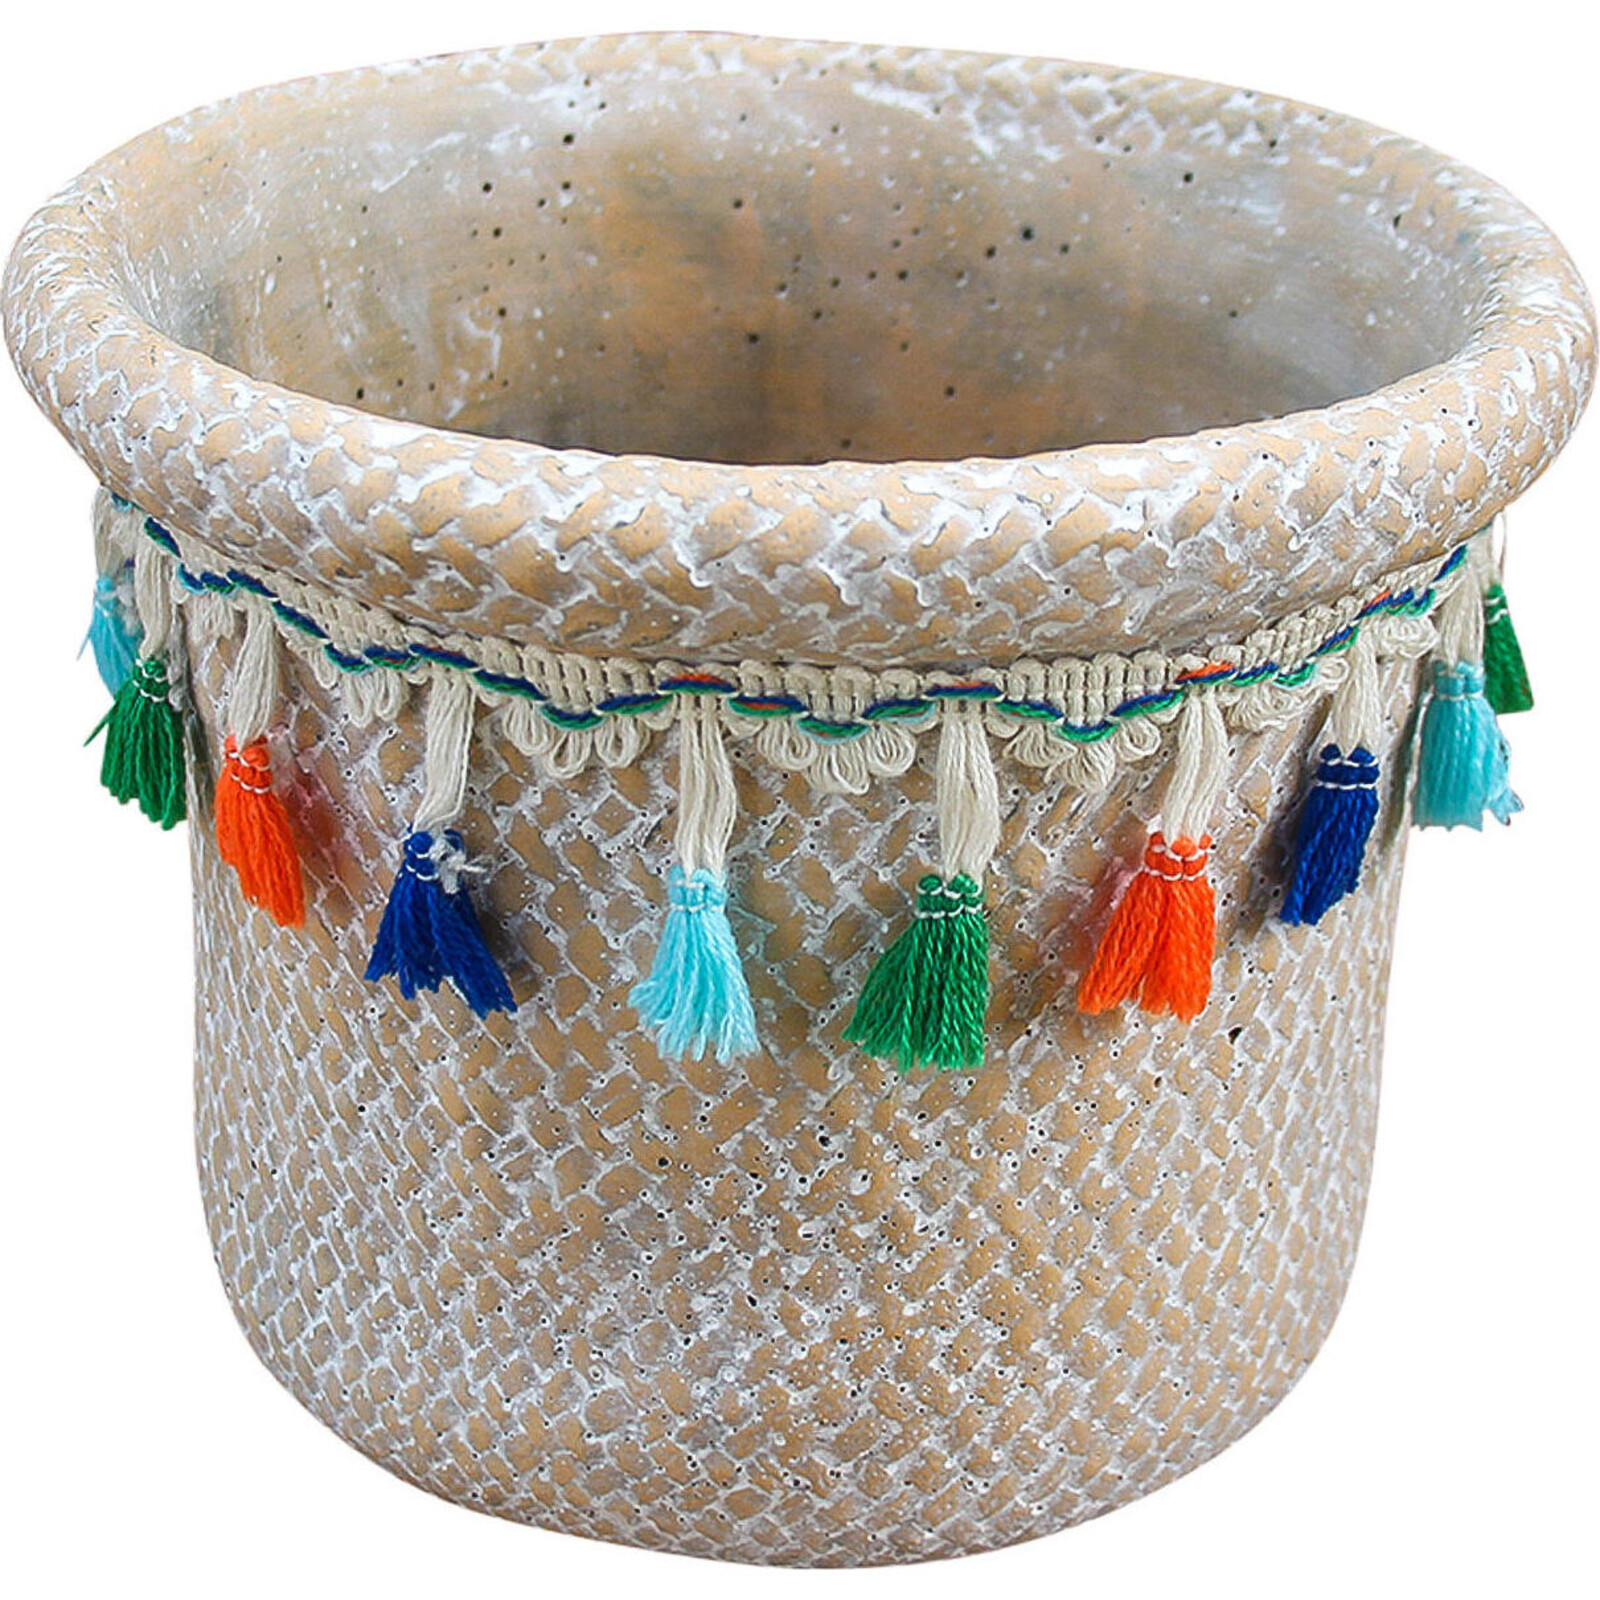 Pot with Tassels Sml